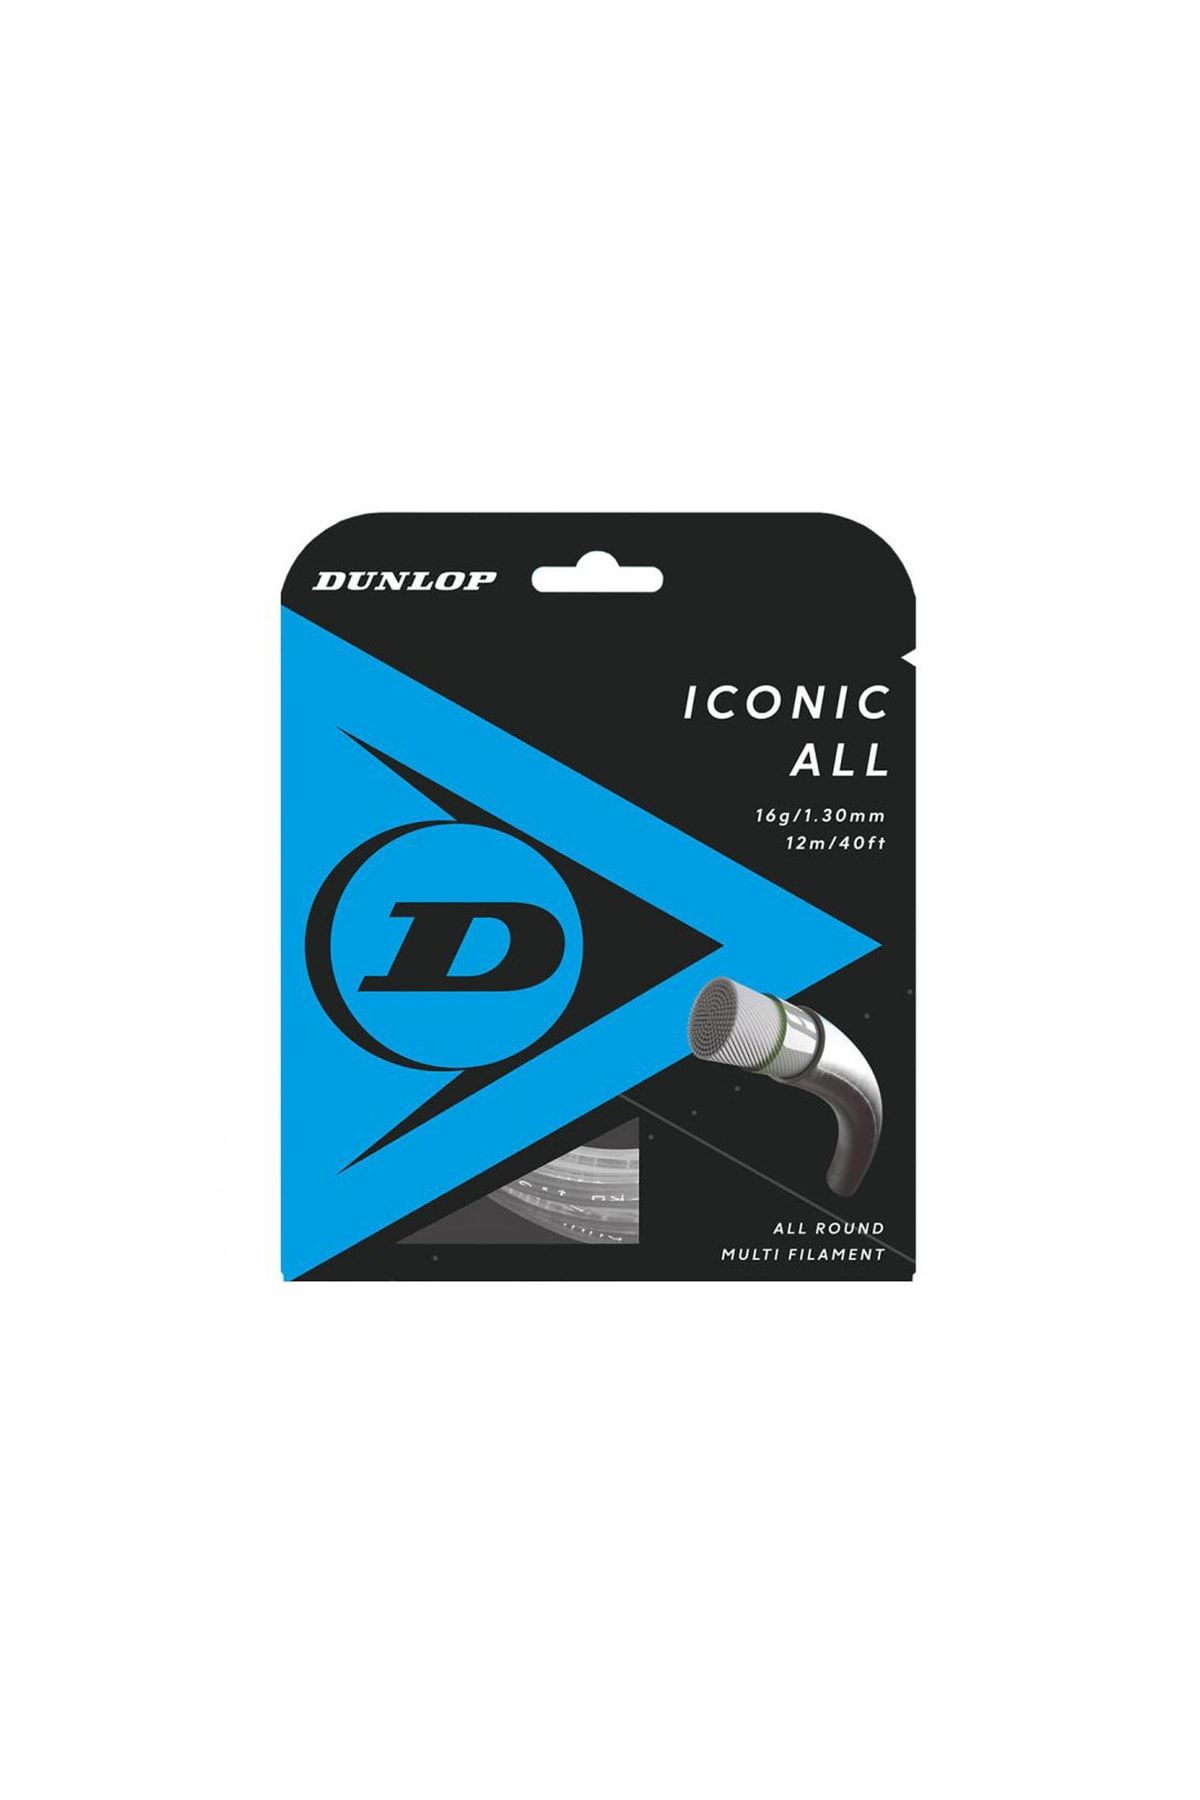 Dunlop Iconic All 1.30 12m Set